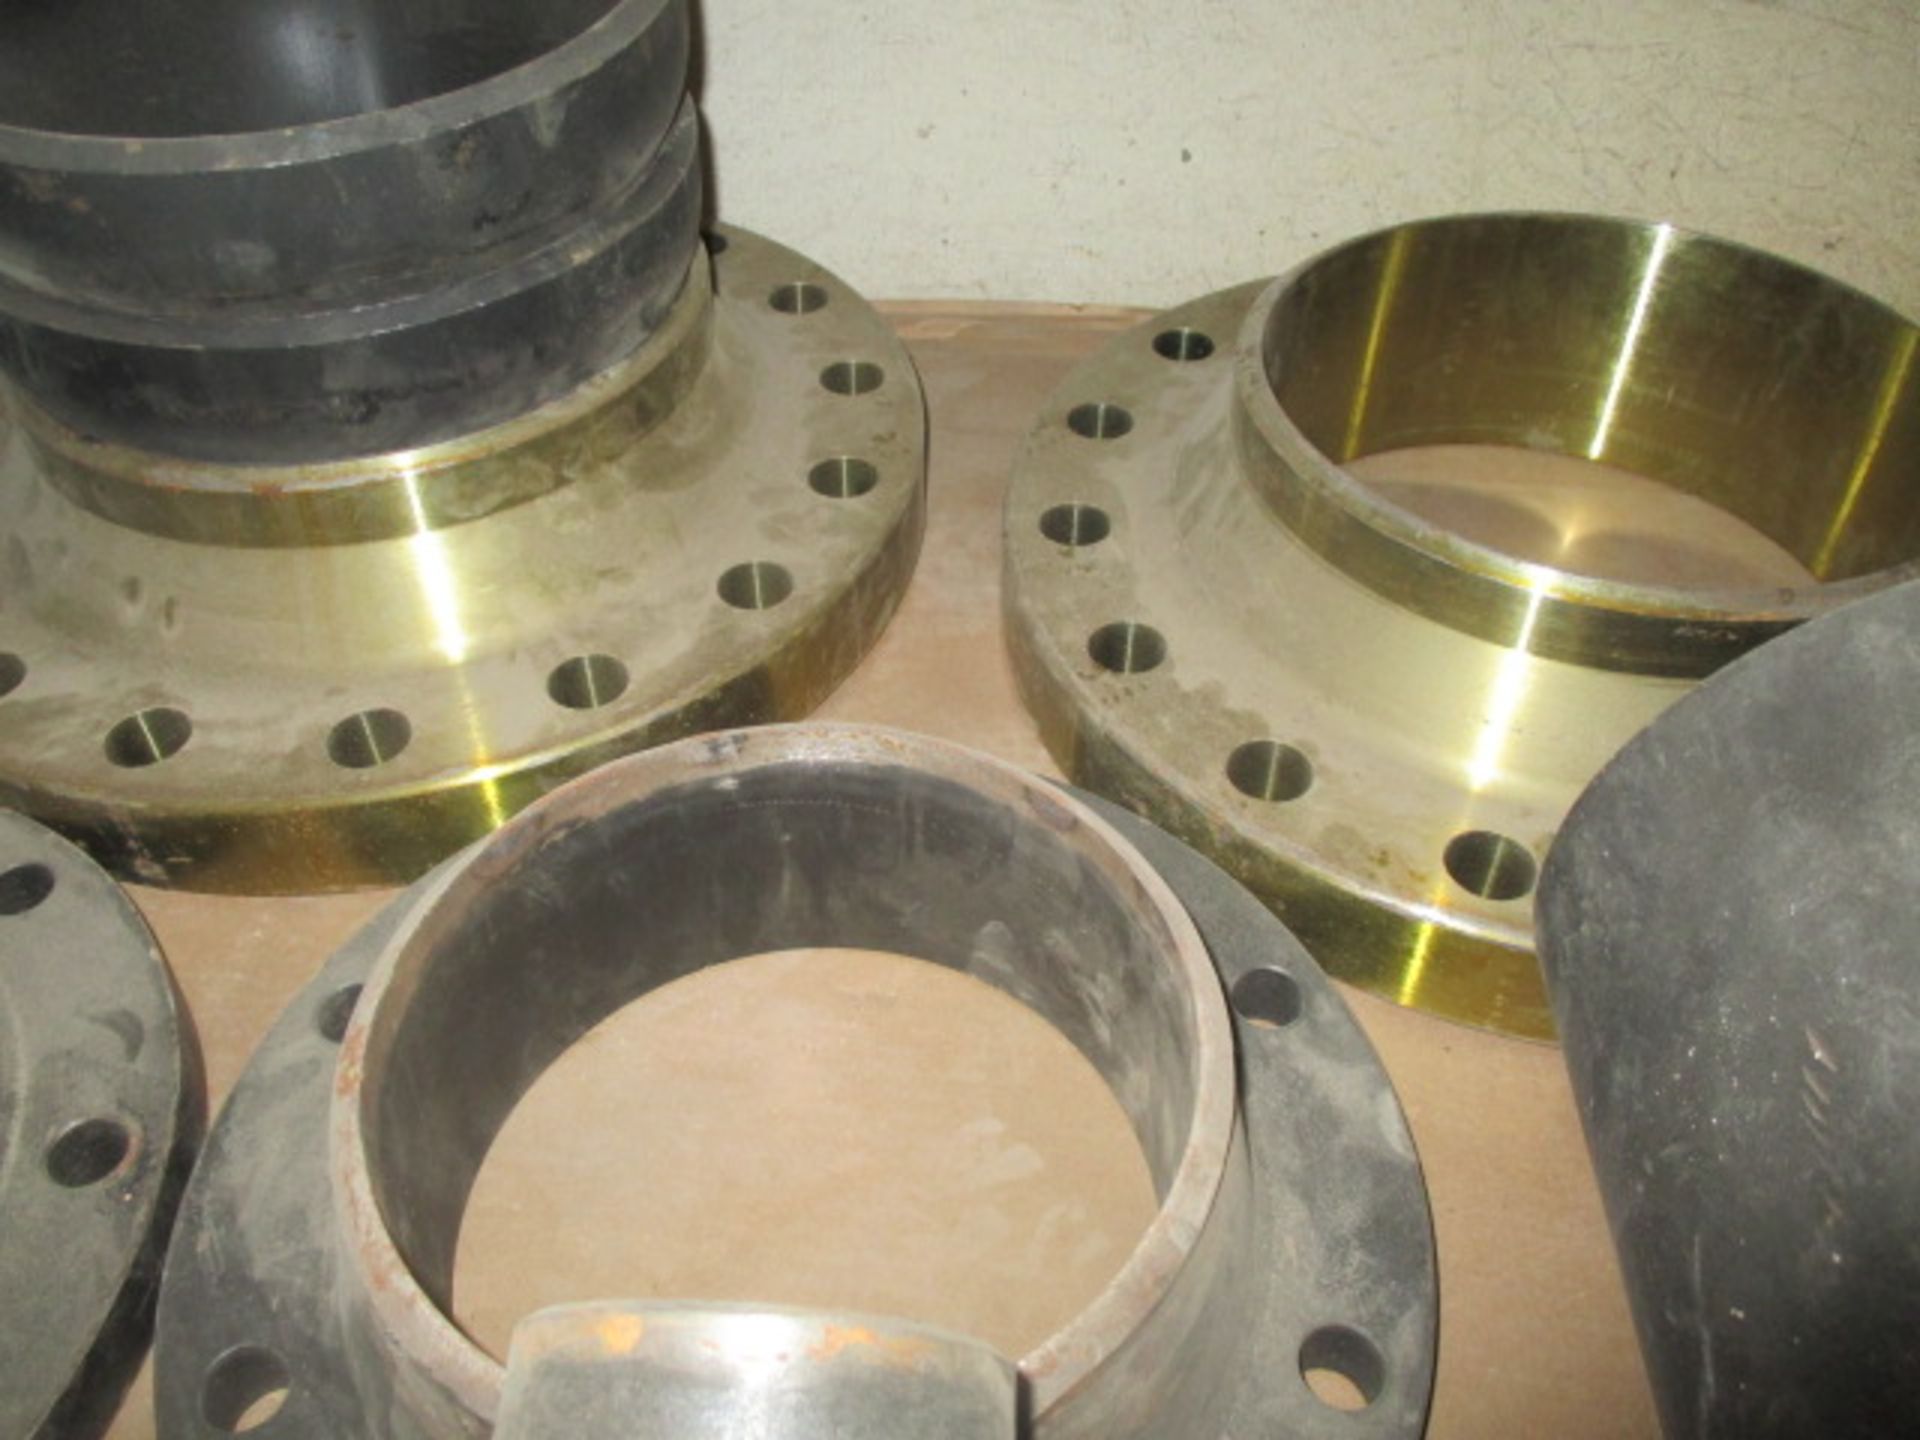 Skid lot of Various Pipe "Ts" and End Flanges 8"